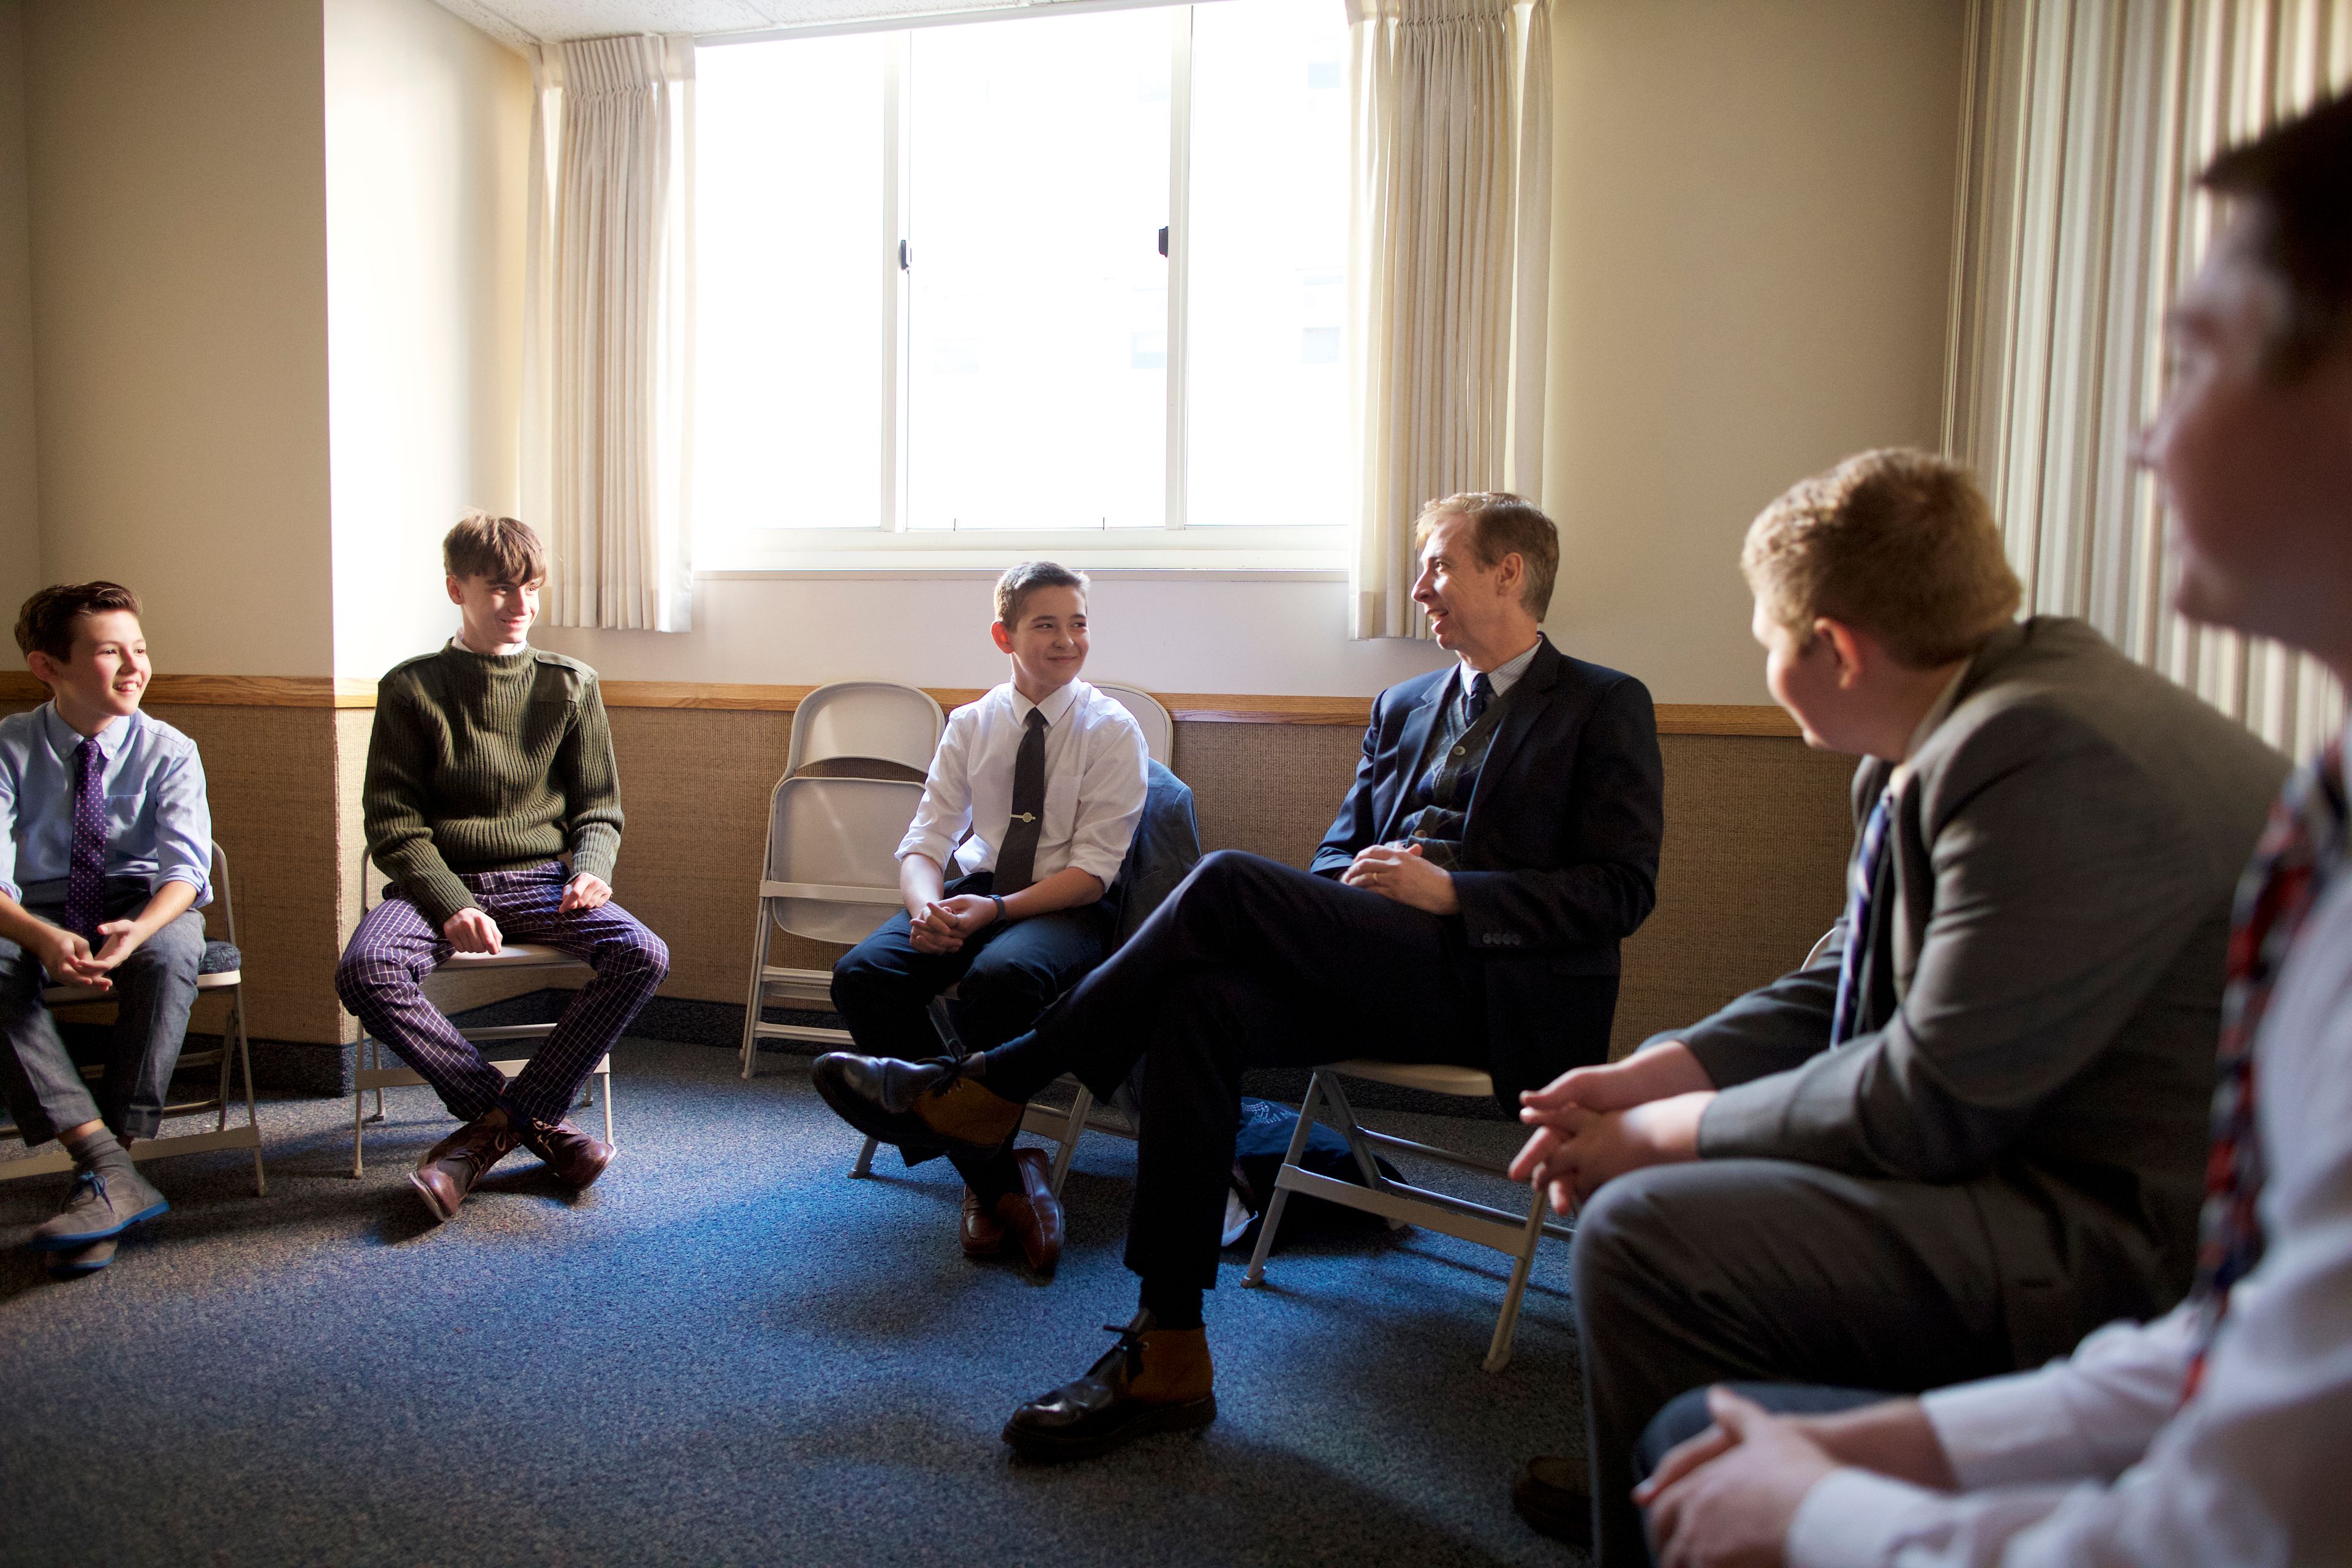 A quorum of young men in New York sit in a classroom and talk together.